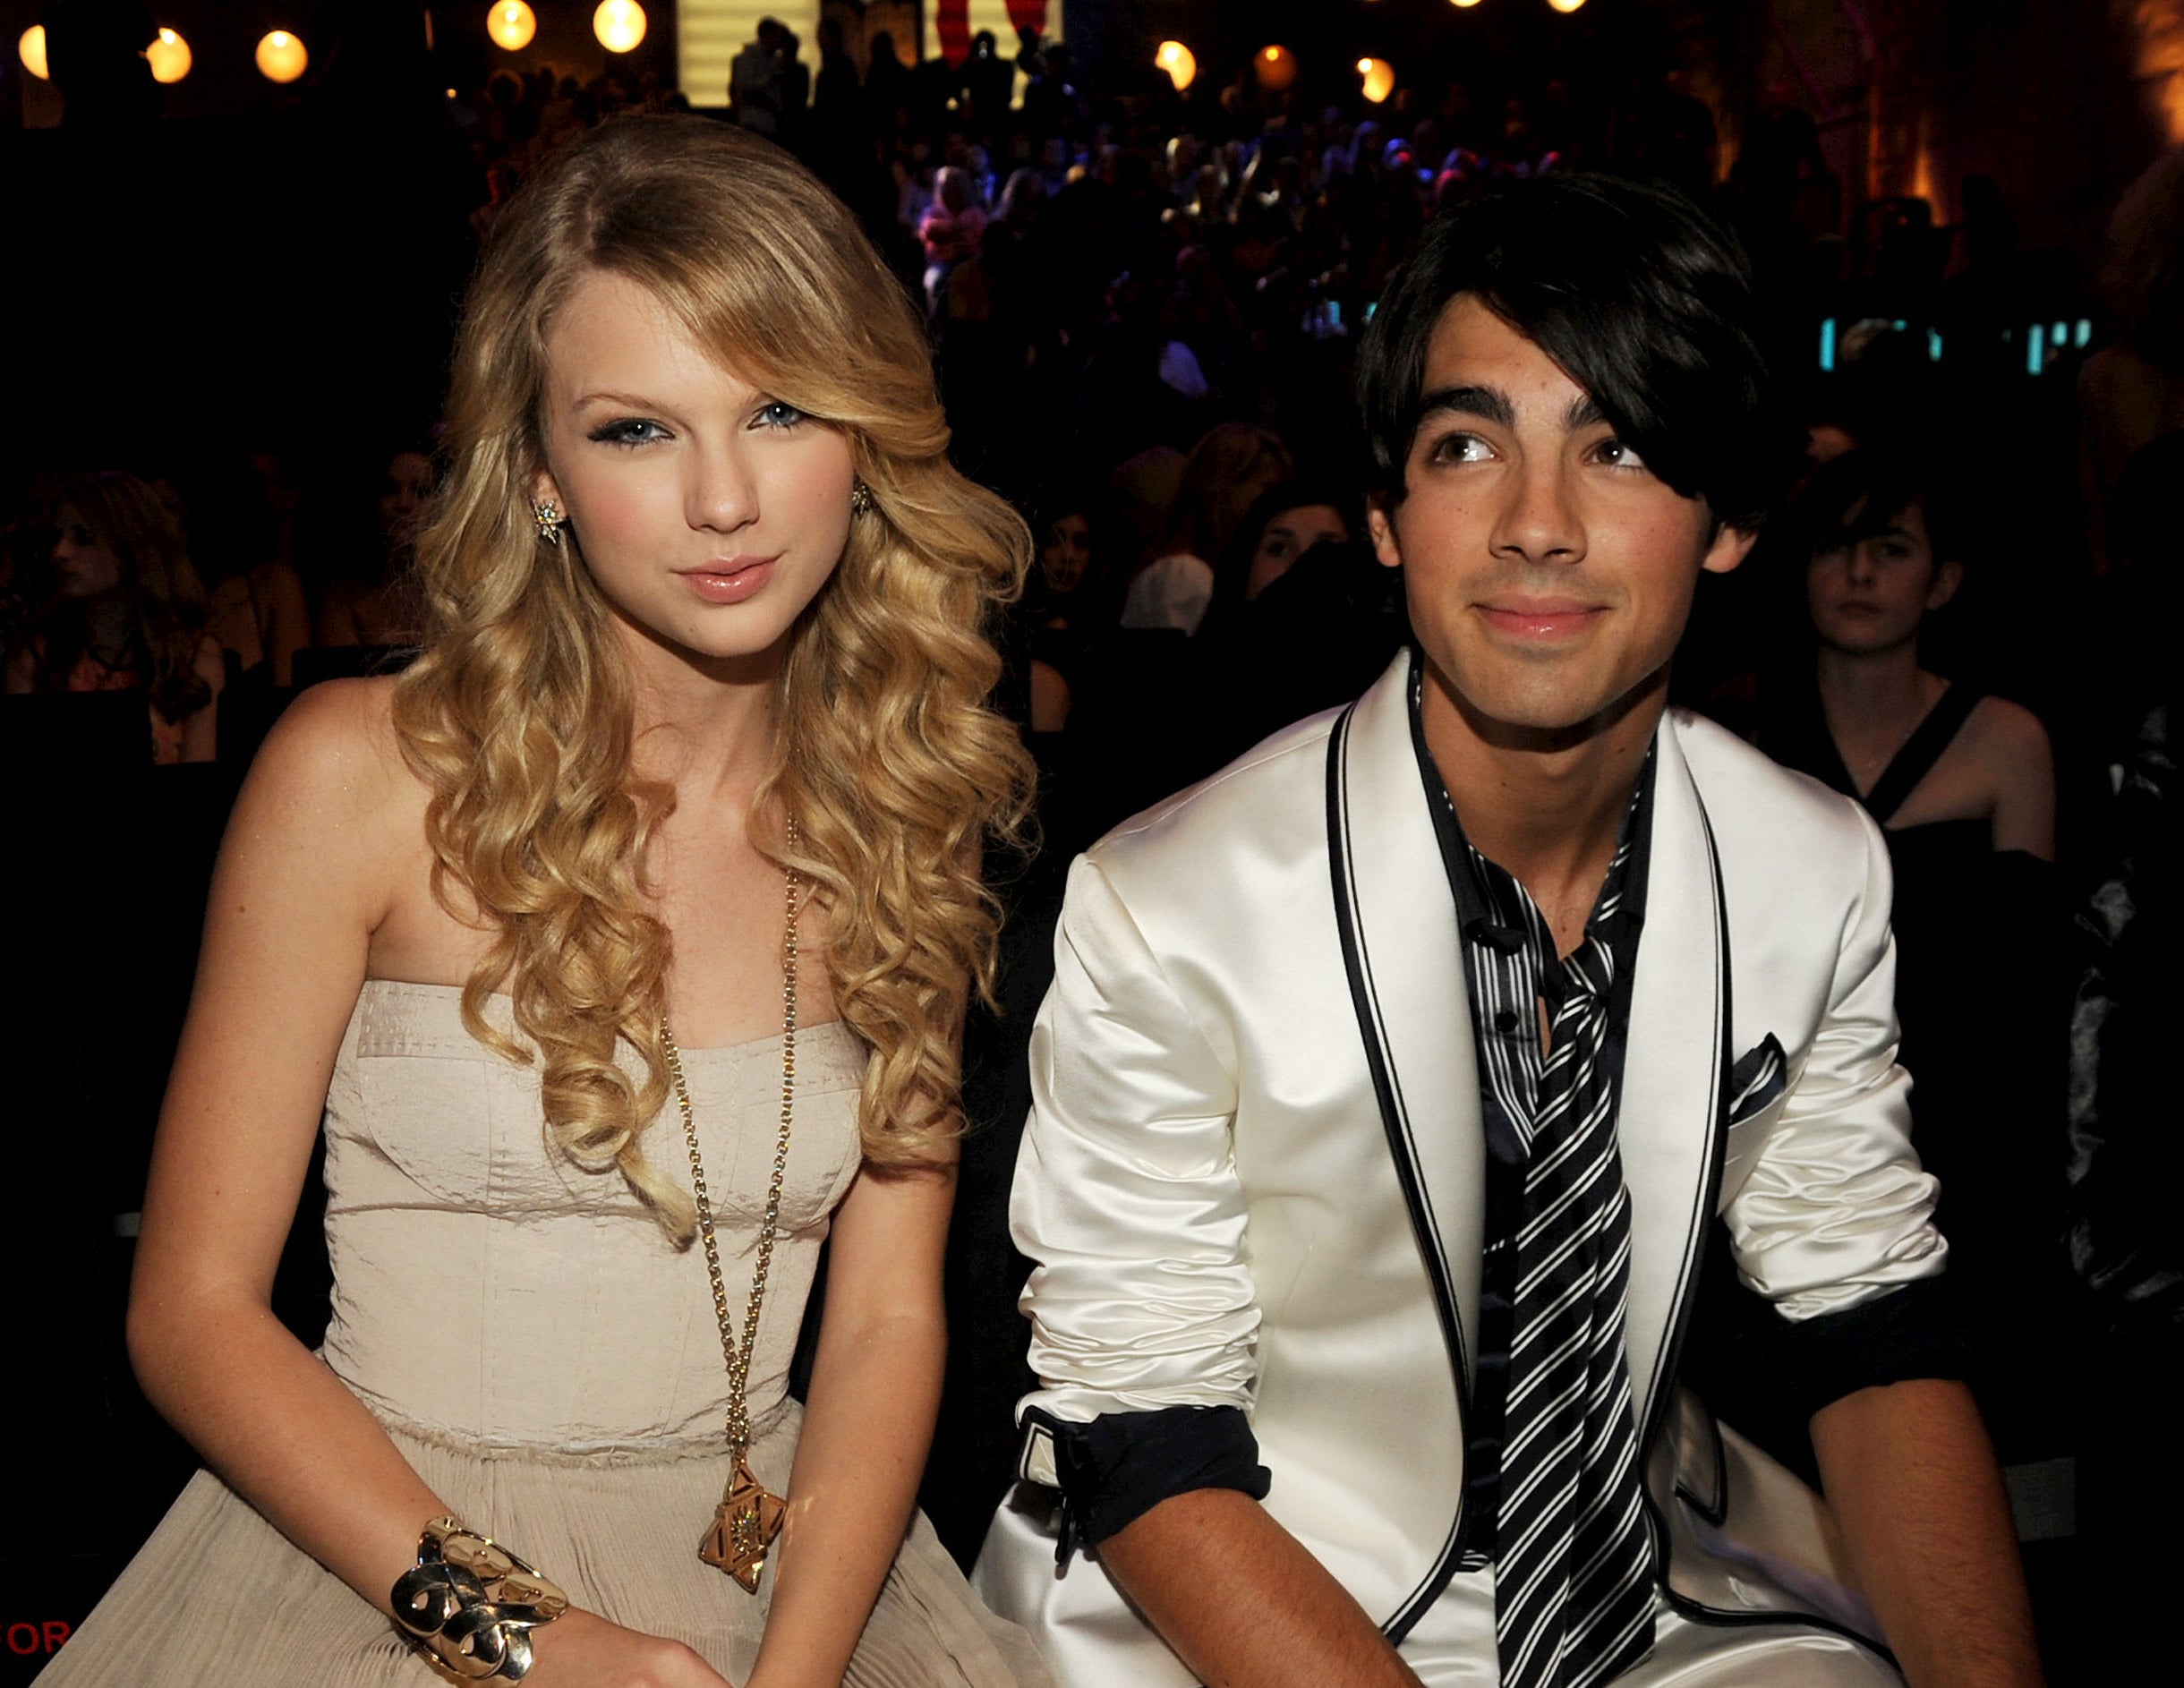 Close-up of Taylor sitting with Joe